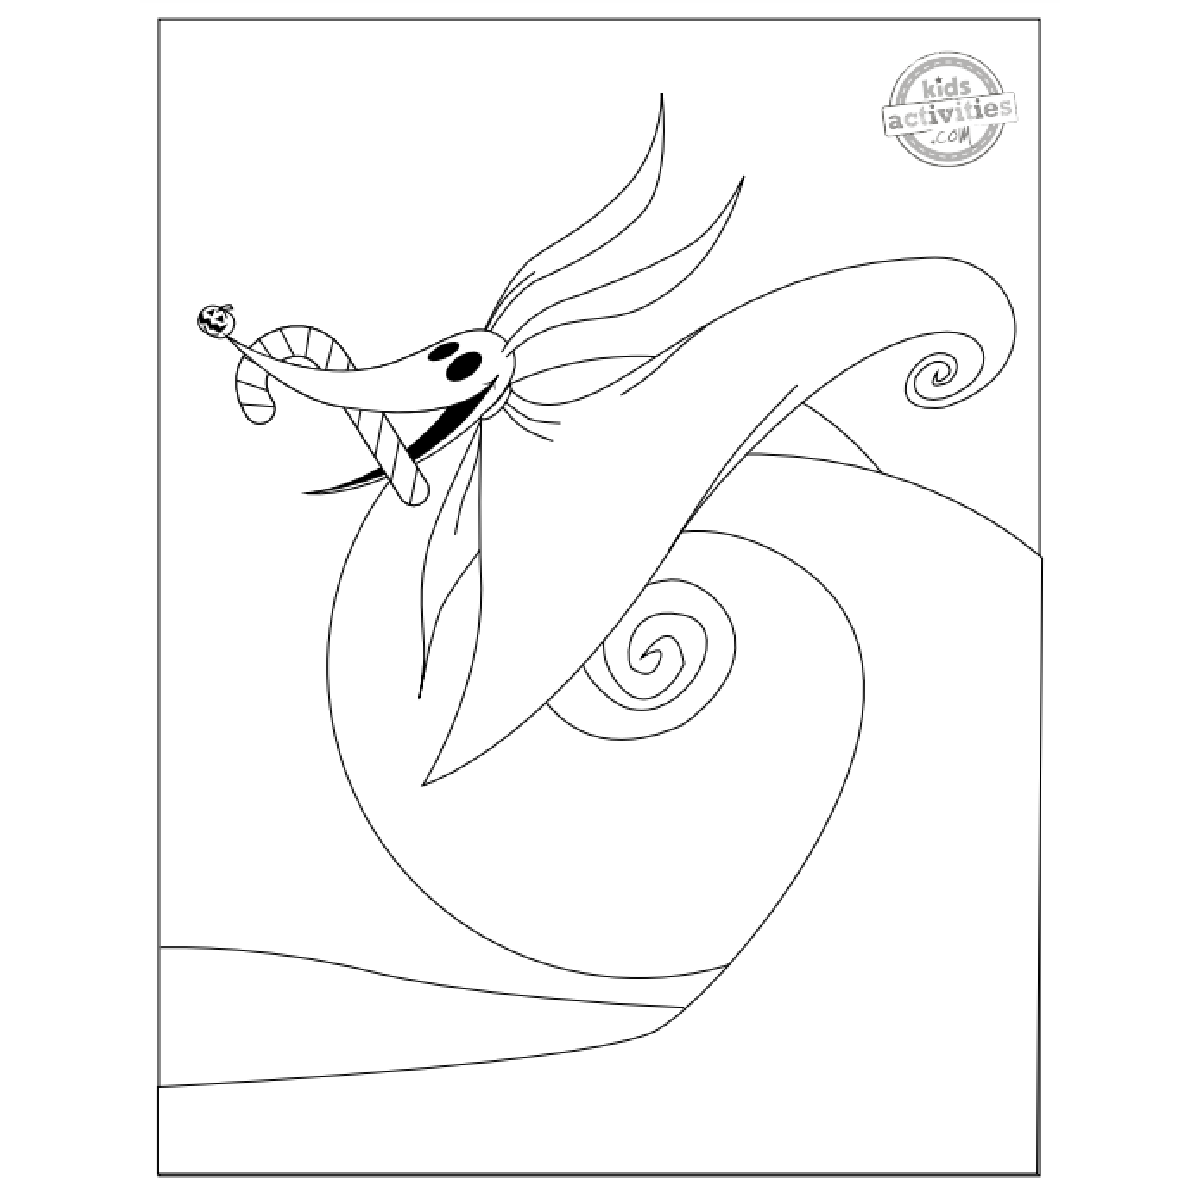 Coolest free printable nightmare before christmas coloring pages kids activities blog